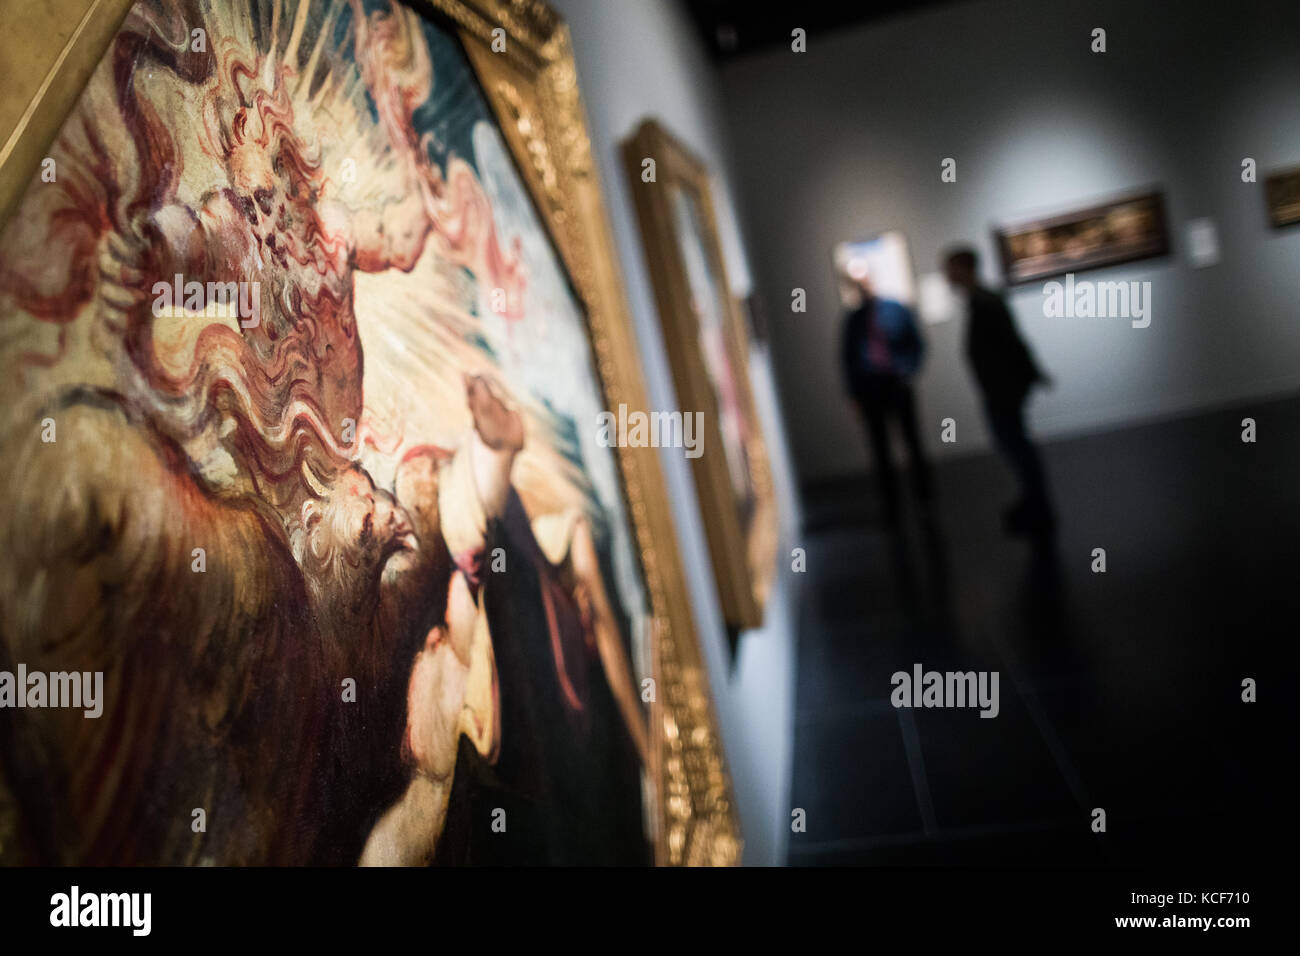 Cologne, Germany. 4th Oct, 2017. The painting 'Jupiter and Semele' (1541/42) by painter Jacopo Tintoretto can be seen at the exhibition 'Tintoretto - A Star was Born' at the Wallraf Richartz Museum in Cologne, Germany, 4 October 2017. The exhibition on the occasion of the 500th birthday of the Venetian painter with lendings from London, Madrid, Milan, Rome, Venice and Washington, inter alia, is open from 6 October 2017 until 28 January 2018. Credit: Rolf Vennenbernd/dpa/Alamy Live News Stock Photo